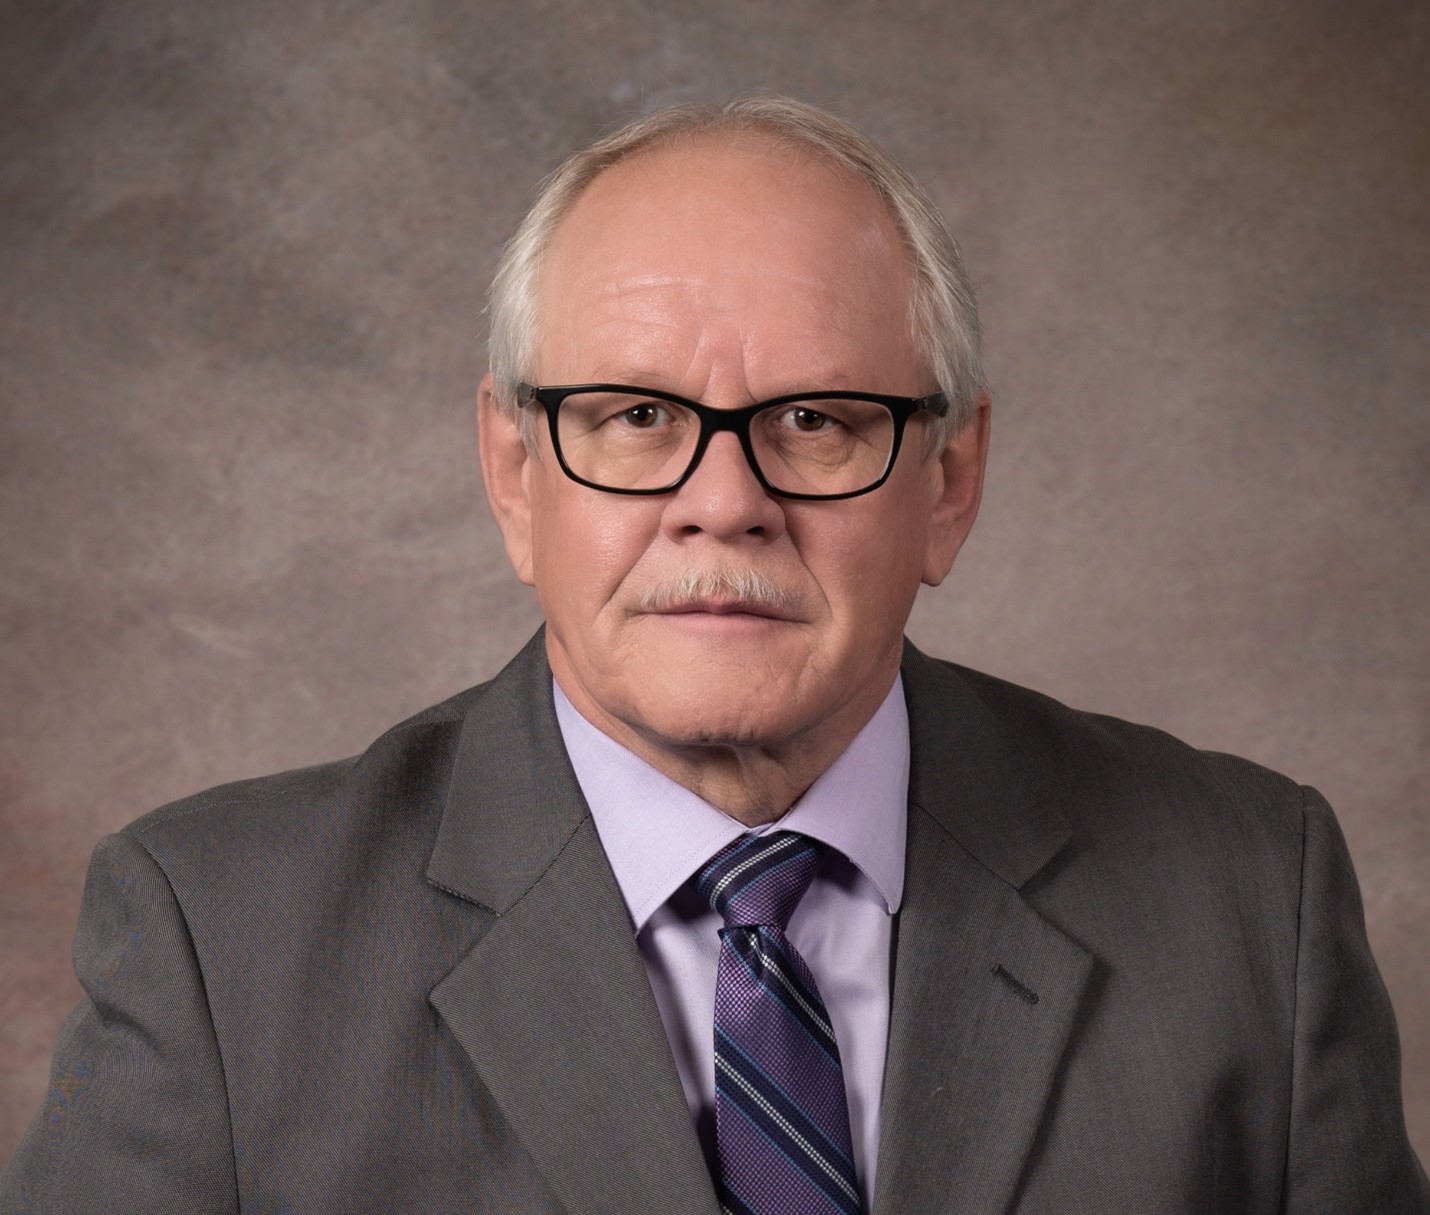 Ron McCullough, a white man with white hair on the sides and a white moustache, sits in front of a mottled brown background, wearing black glasses, a grey suit, a purple shirt, and a patterned purple tie